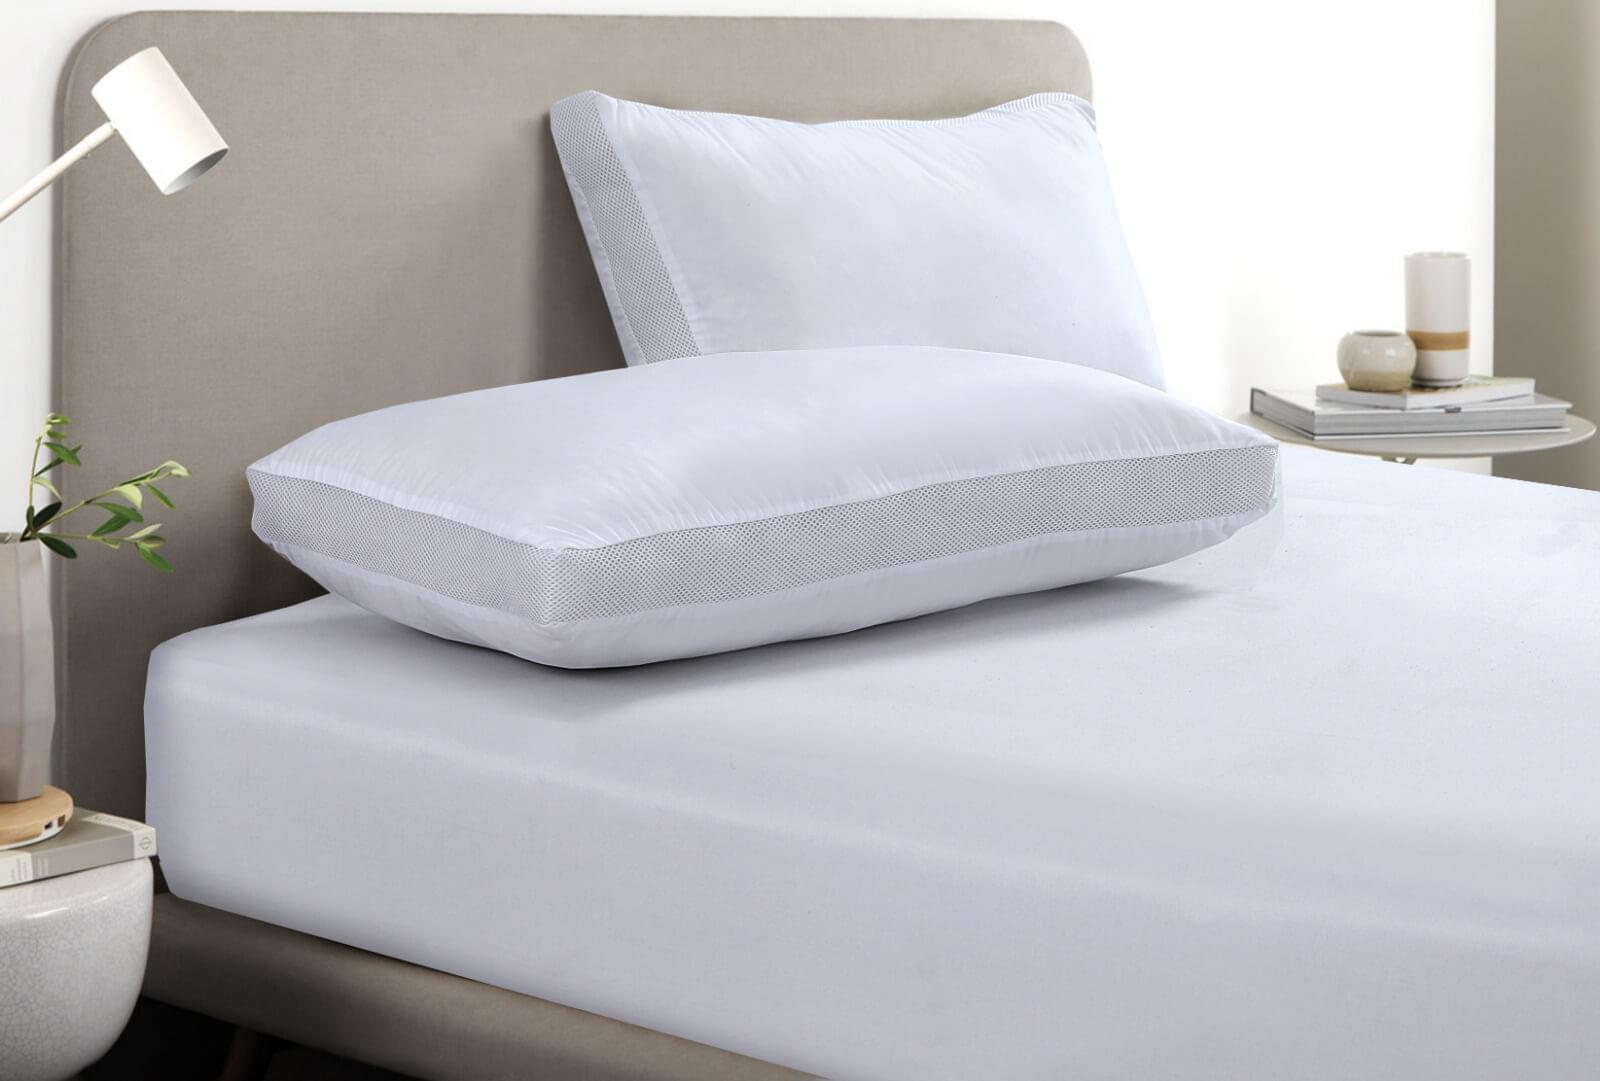 AirMax Regular Pillow With Air Mesh Sides Experience the Ultimate Comfort - Bedding Home